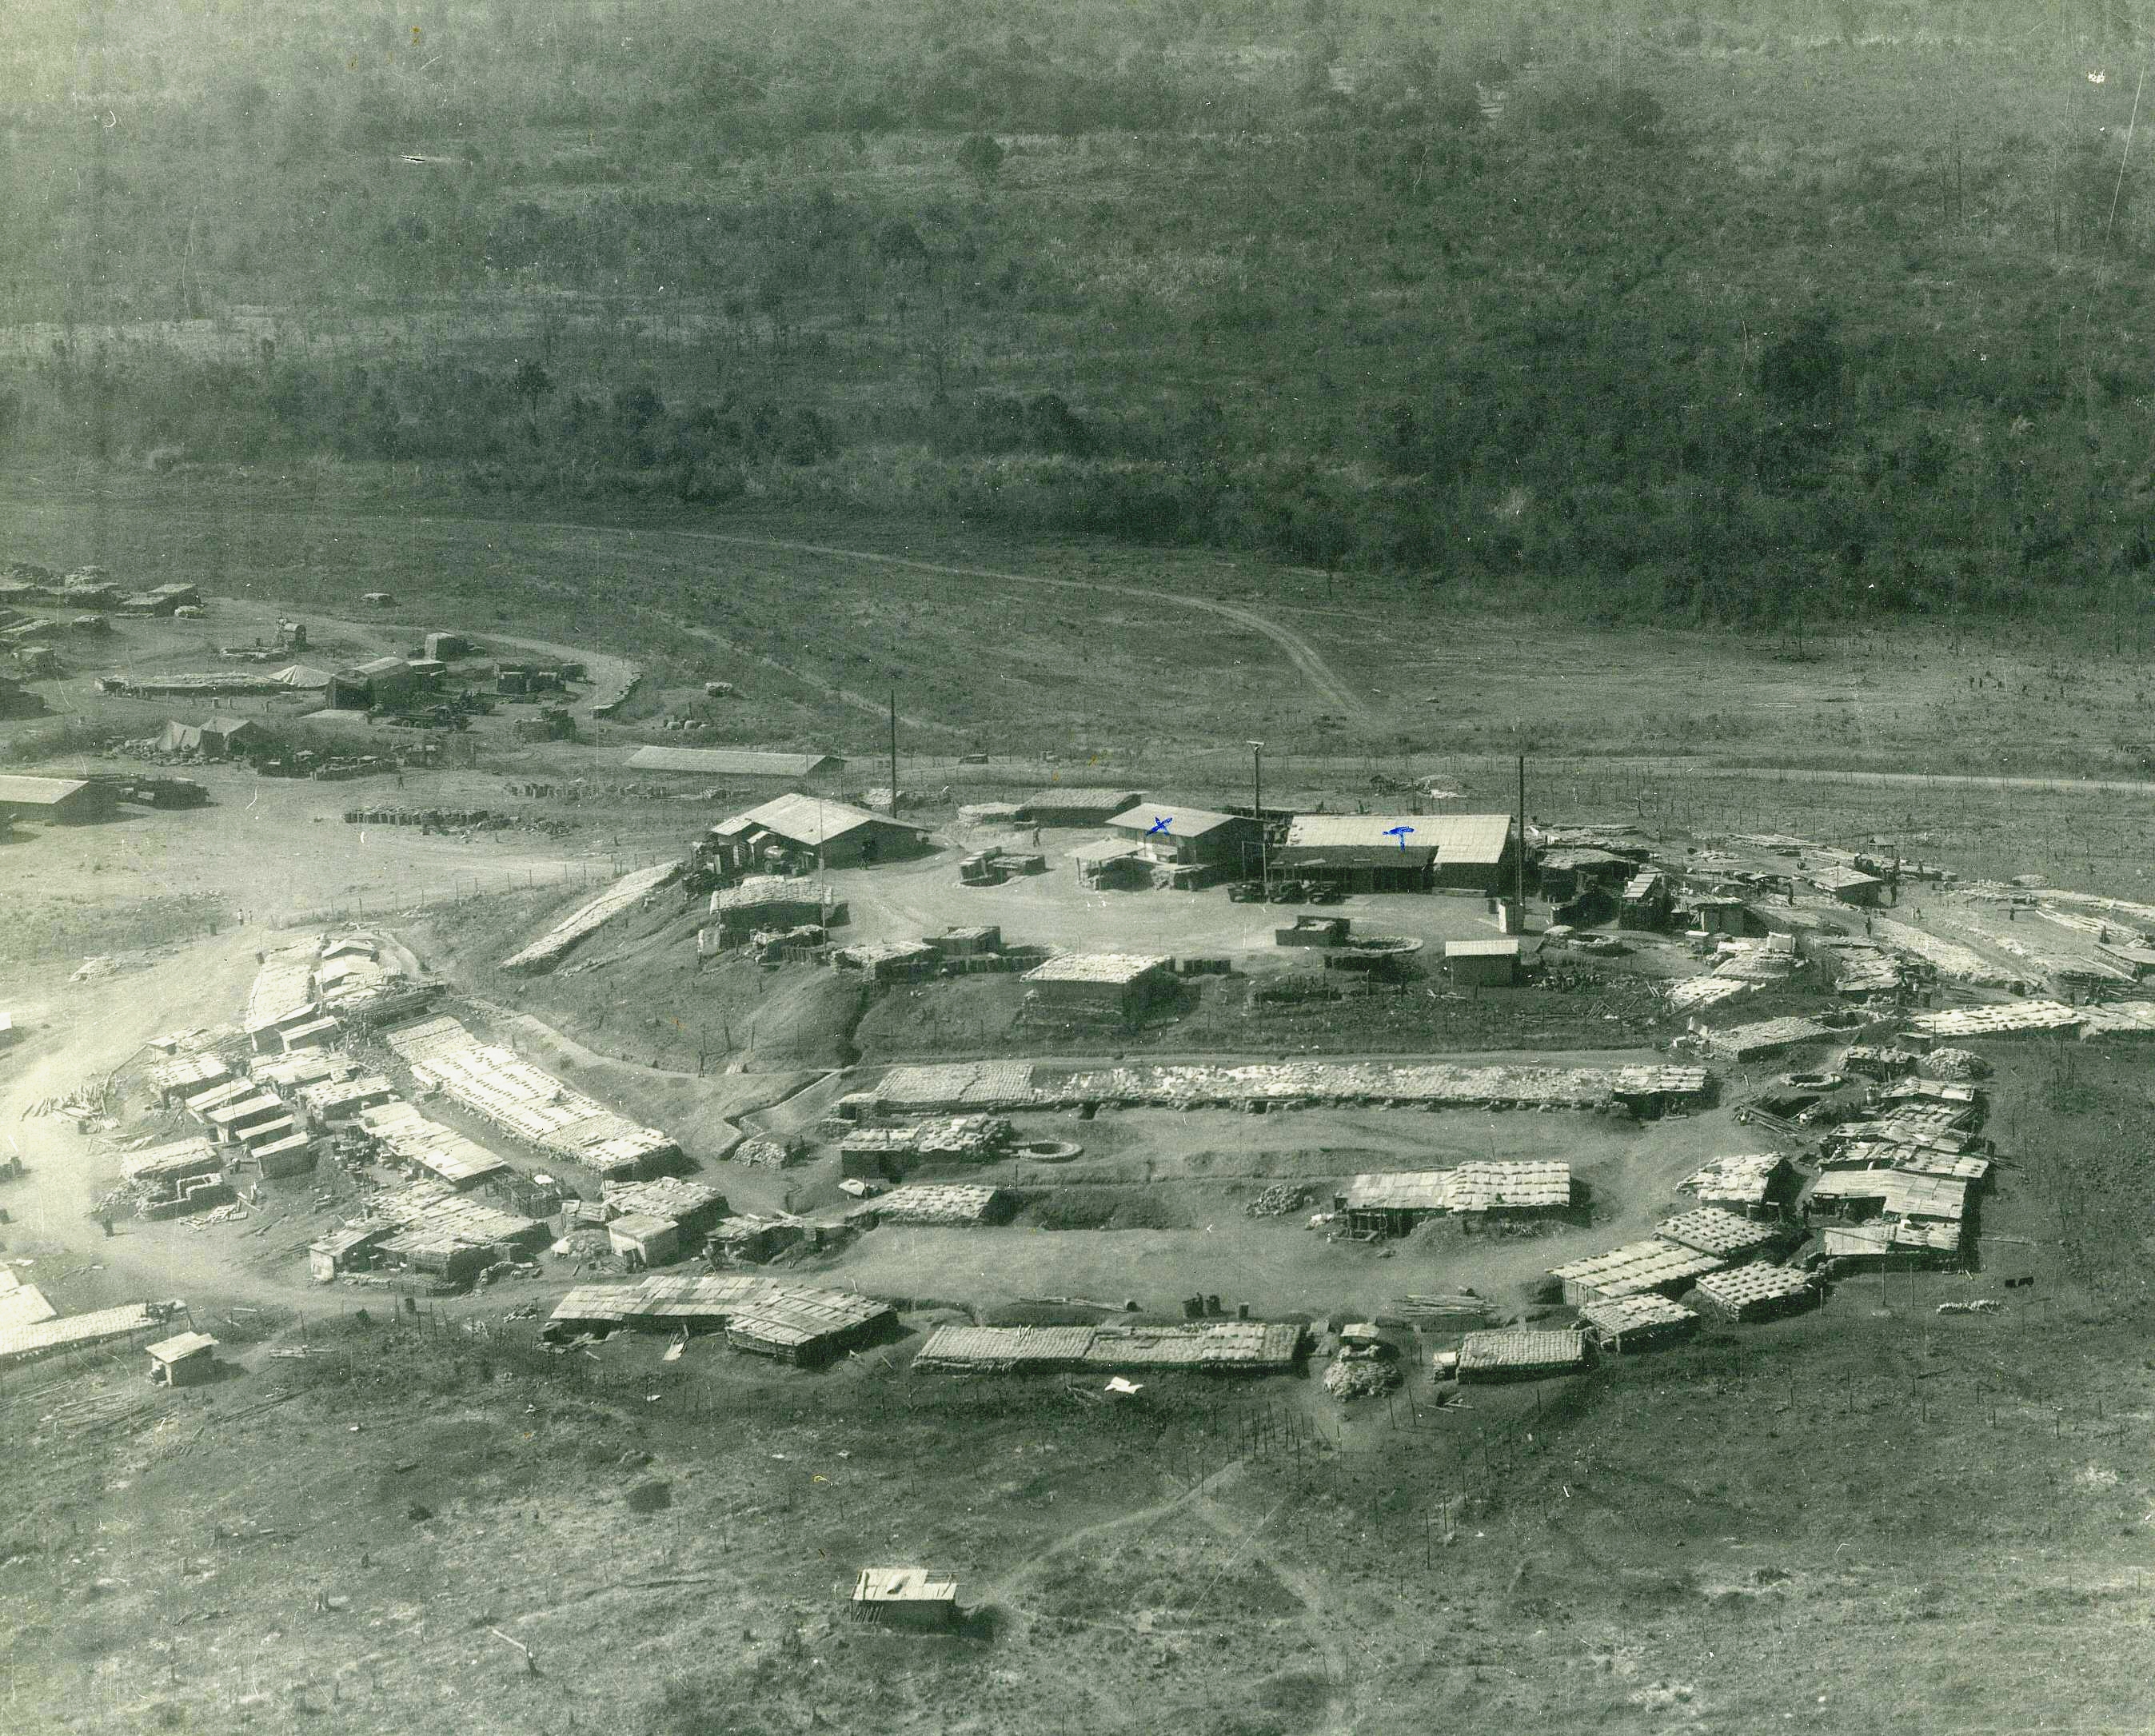 Special Forces Camp Plei Djereng A-251, West of Pleiku on the border in II Corps, RVN, 1968